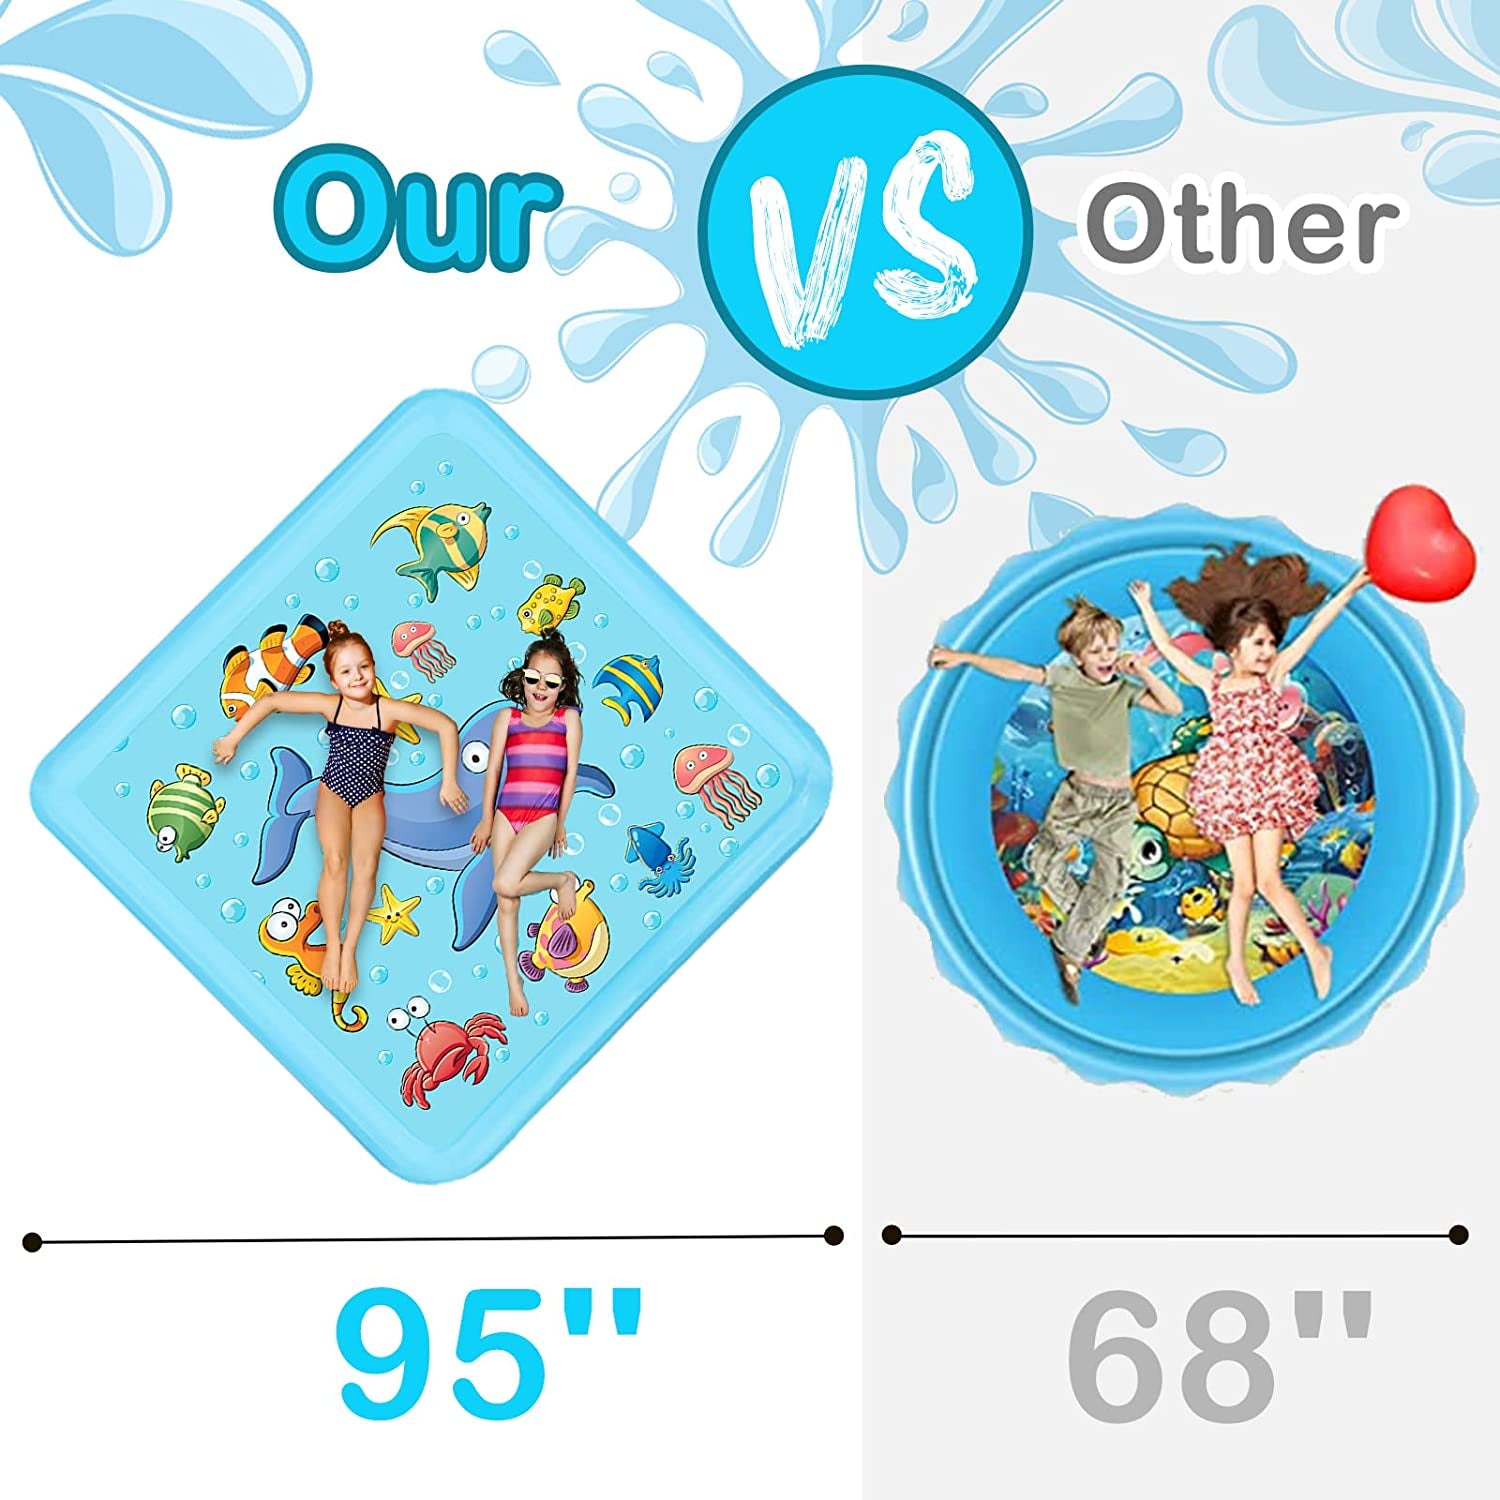 Splash Pad for Toddlers, Outdoor Sprinkler for Kids, 67" Summer Water Toys Inflatable Wading Baby Pool Fun Gifts for 3 4 5 6 7 8 9 Years Old Boy Girl Backyard Garden Lawn Outdoor Games